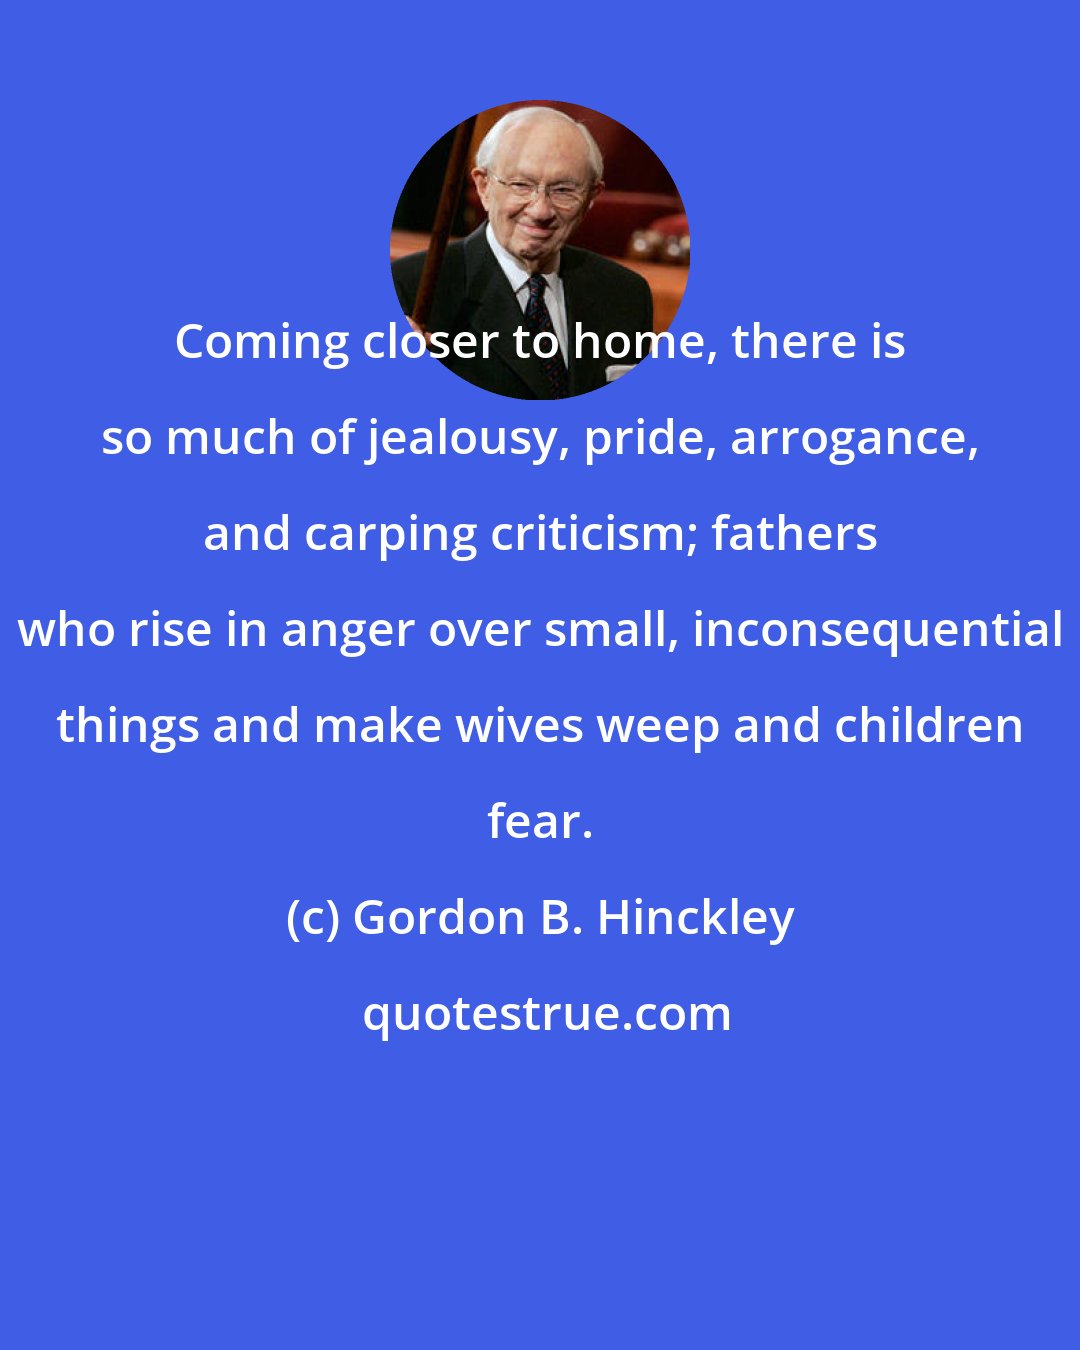 Gordon B. Hinckley: Coming closer to home, there is so much of jealousy, pride, arrogance, and carping criticism; fathers who rise in anger over small, inconsequential things and make wives weep and children fear.